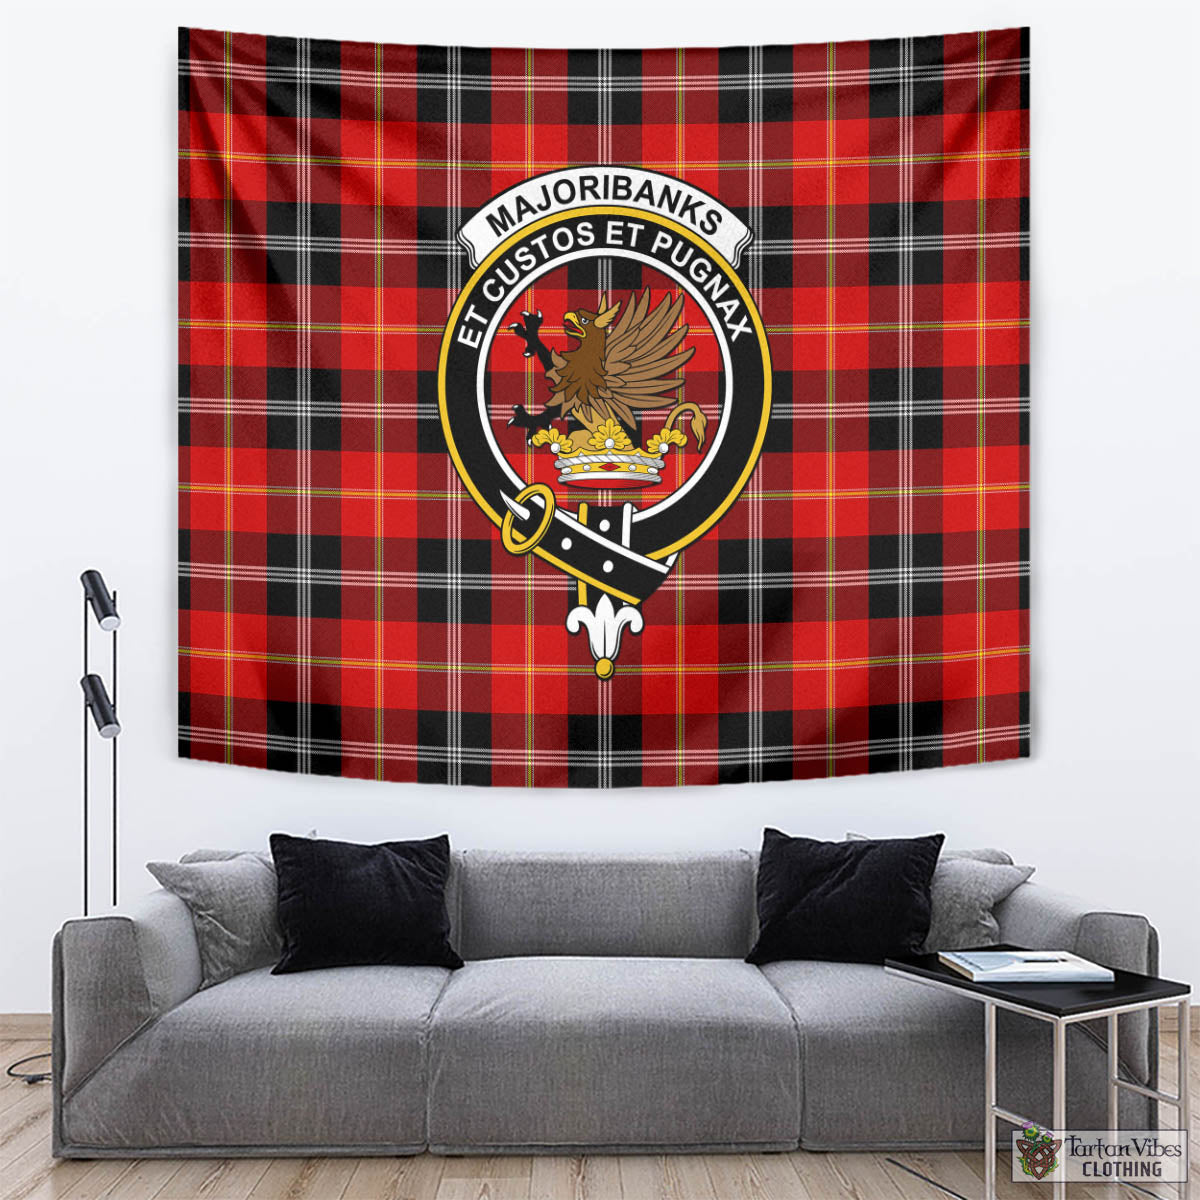 Tartan Vibes Clothing Majoribanks Tartan Tapestry Wall Hanging and Home Decor for Room with Family Crest